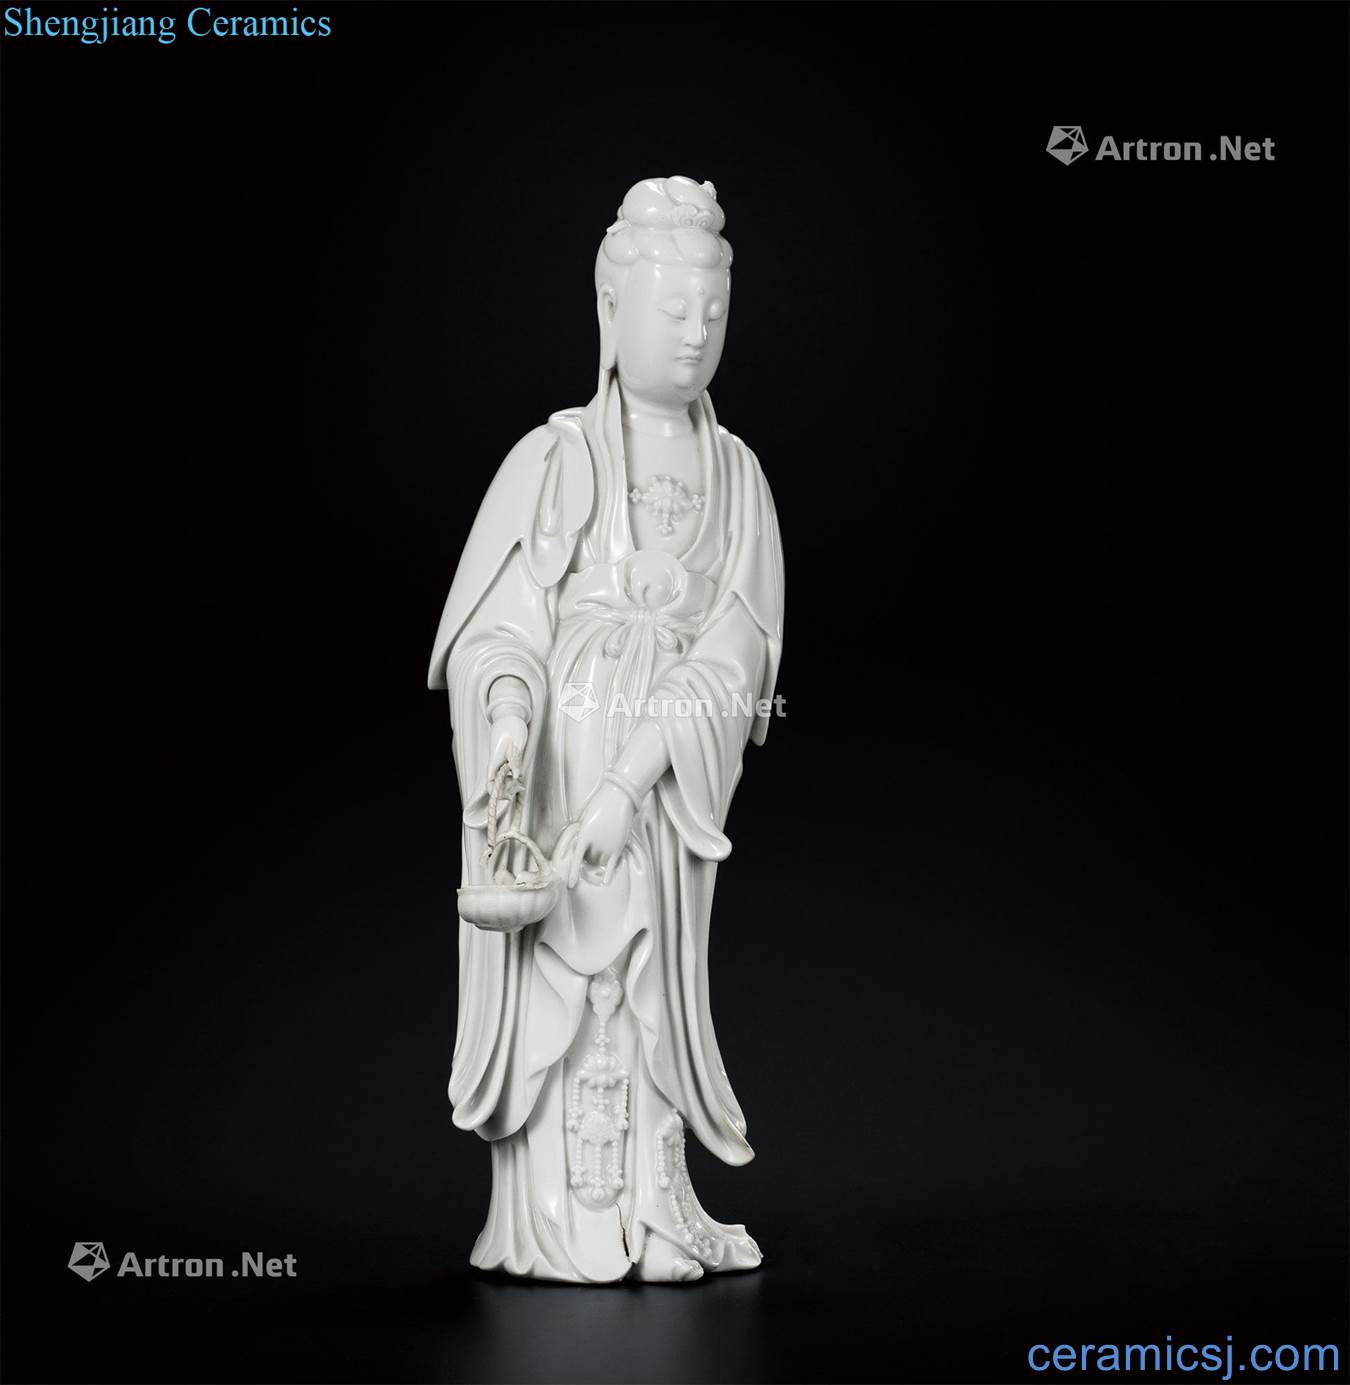 In the late Ming dehua kiln white porcelain basket guanyin stands resemble